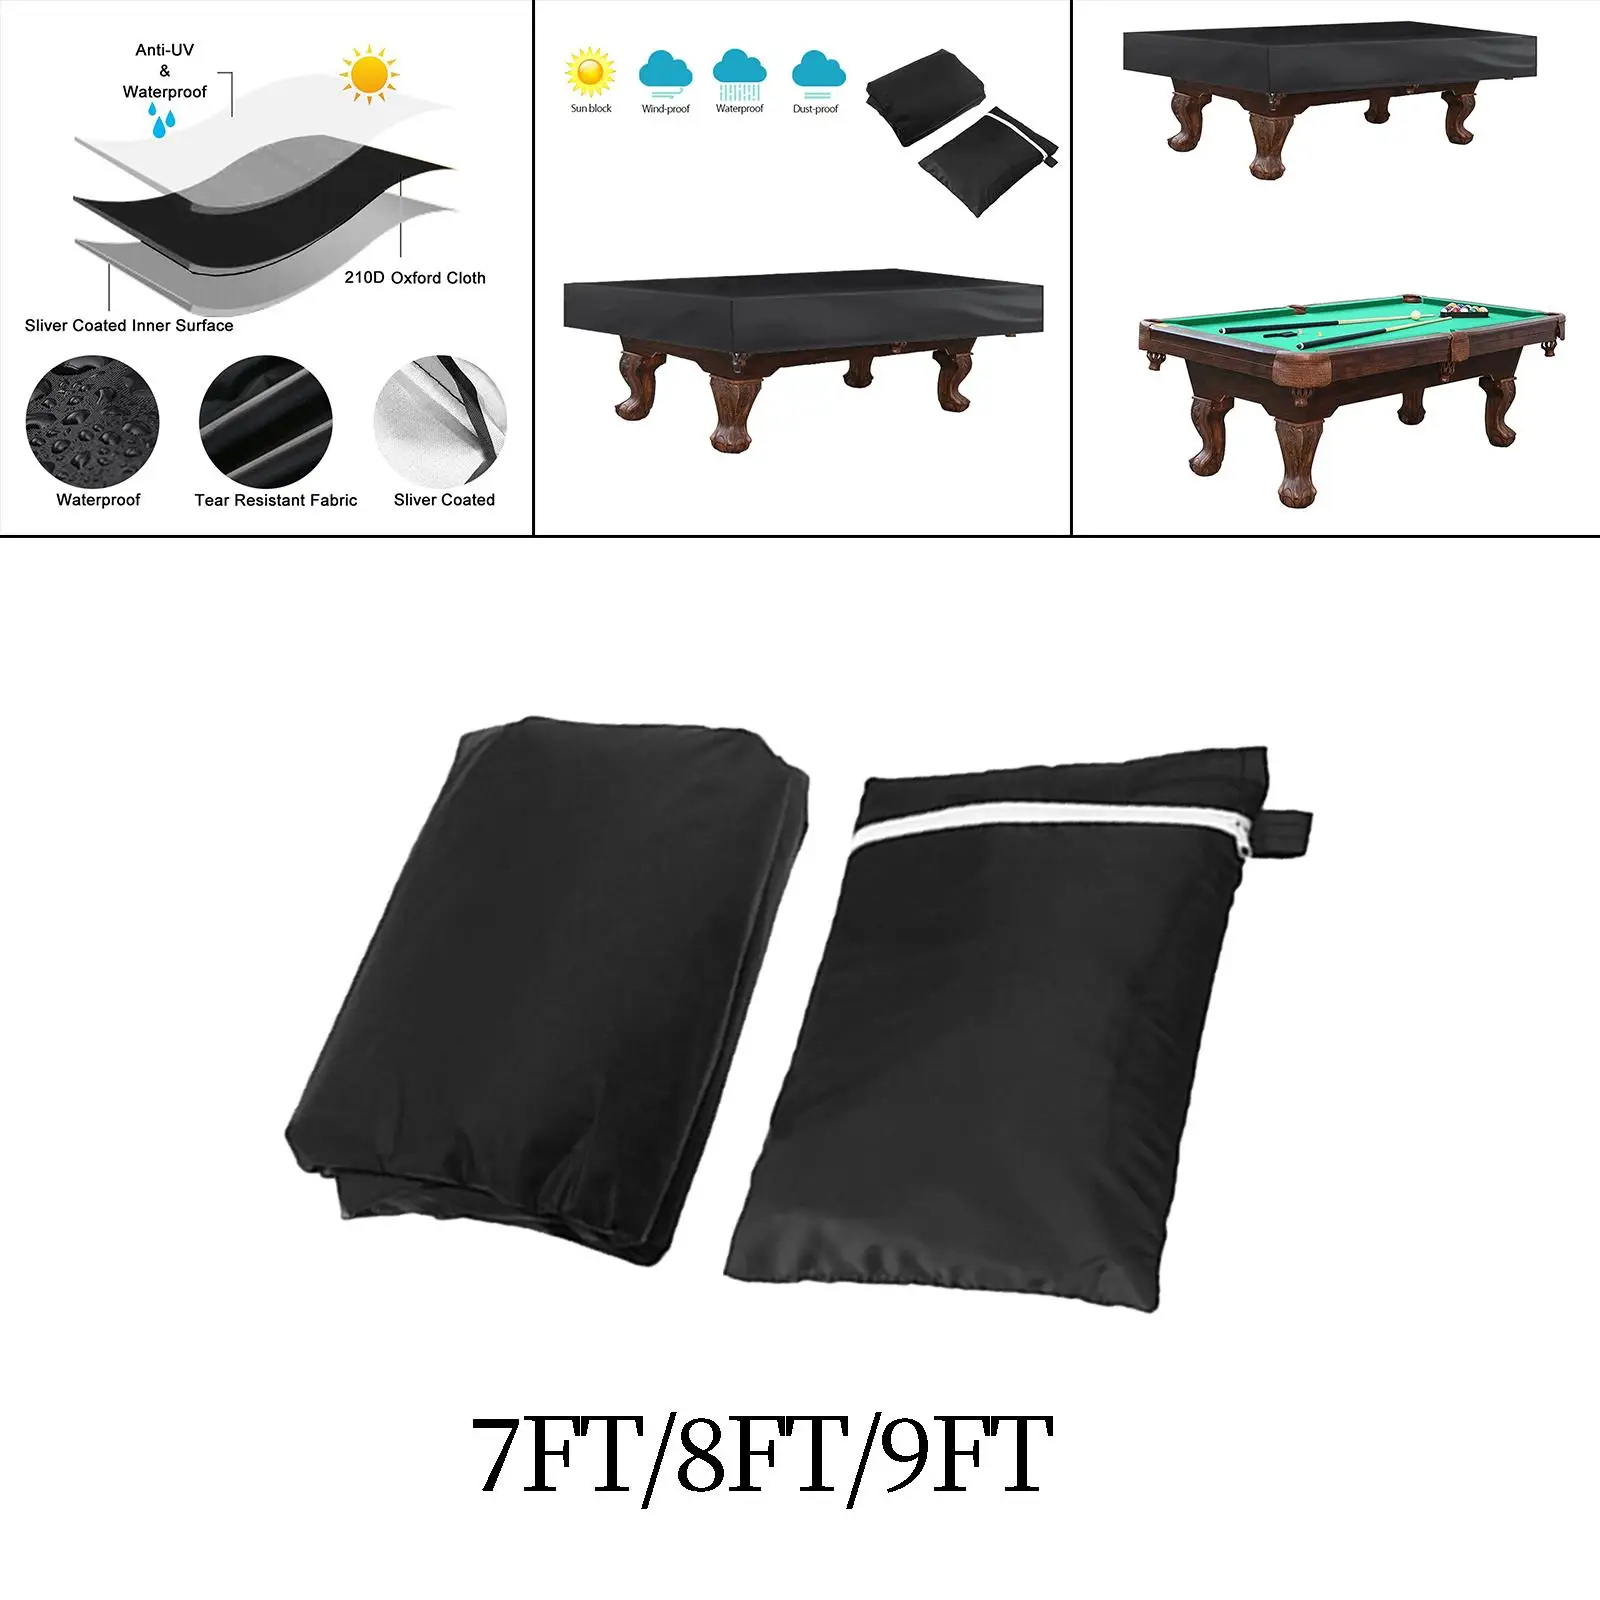 Billiard Pool Table Cover Waterproof Durable with Drawstring Windproof Table Protector for Indoor Outdoor Table Tennis Table